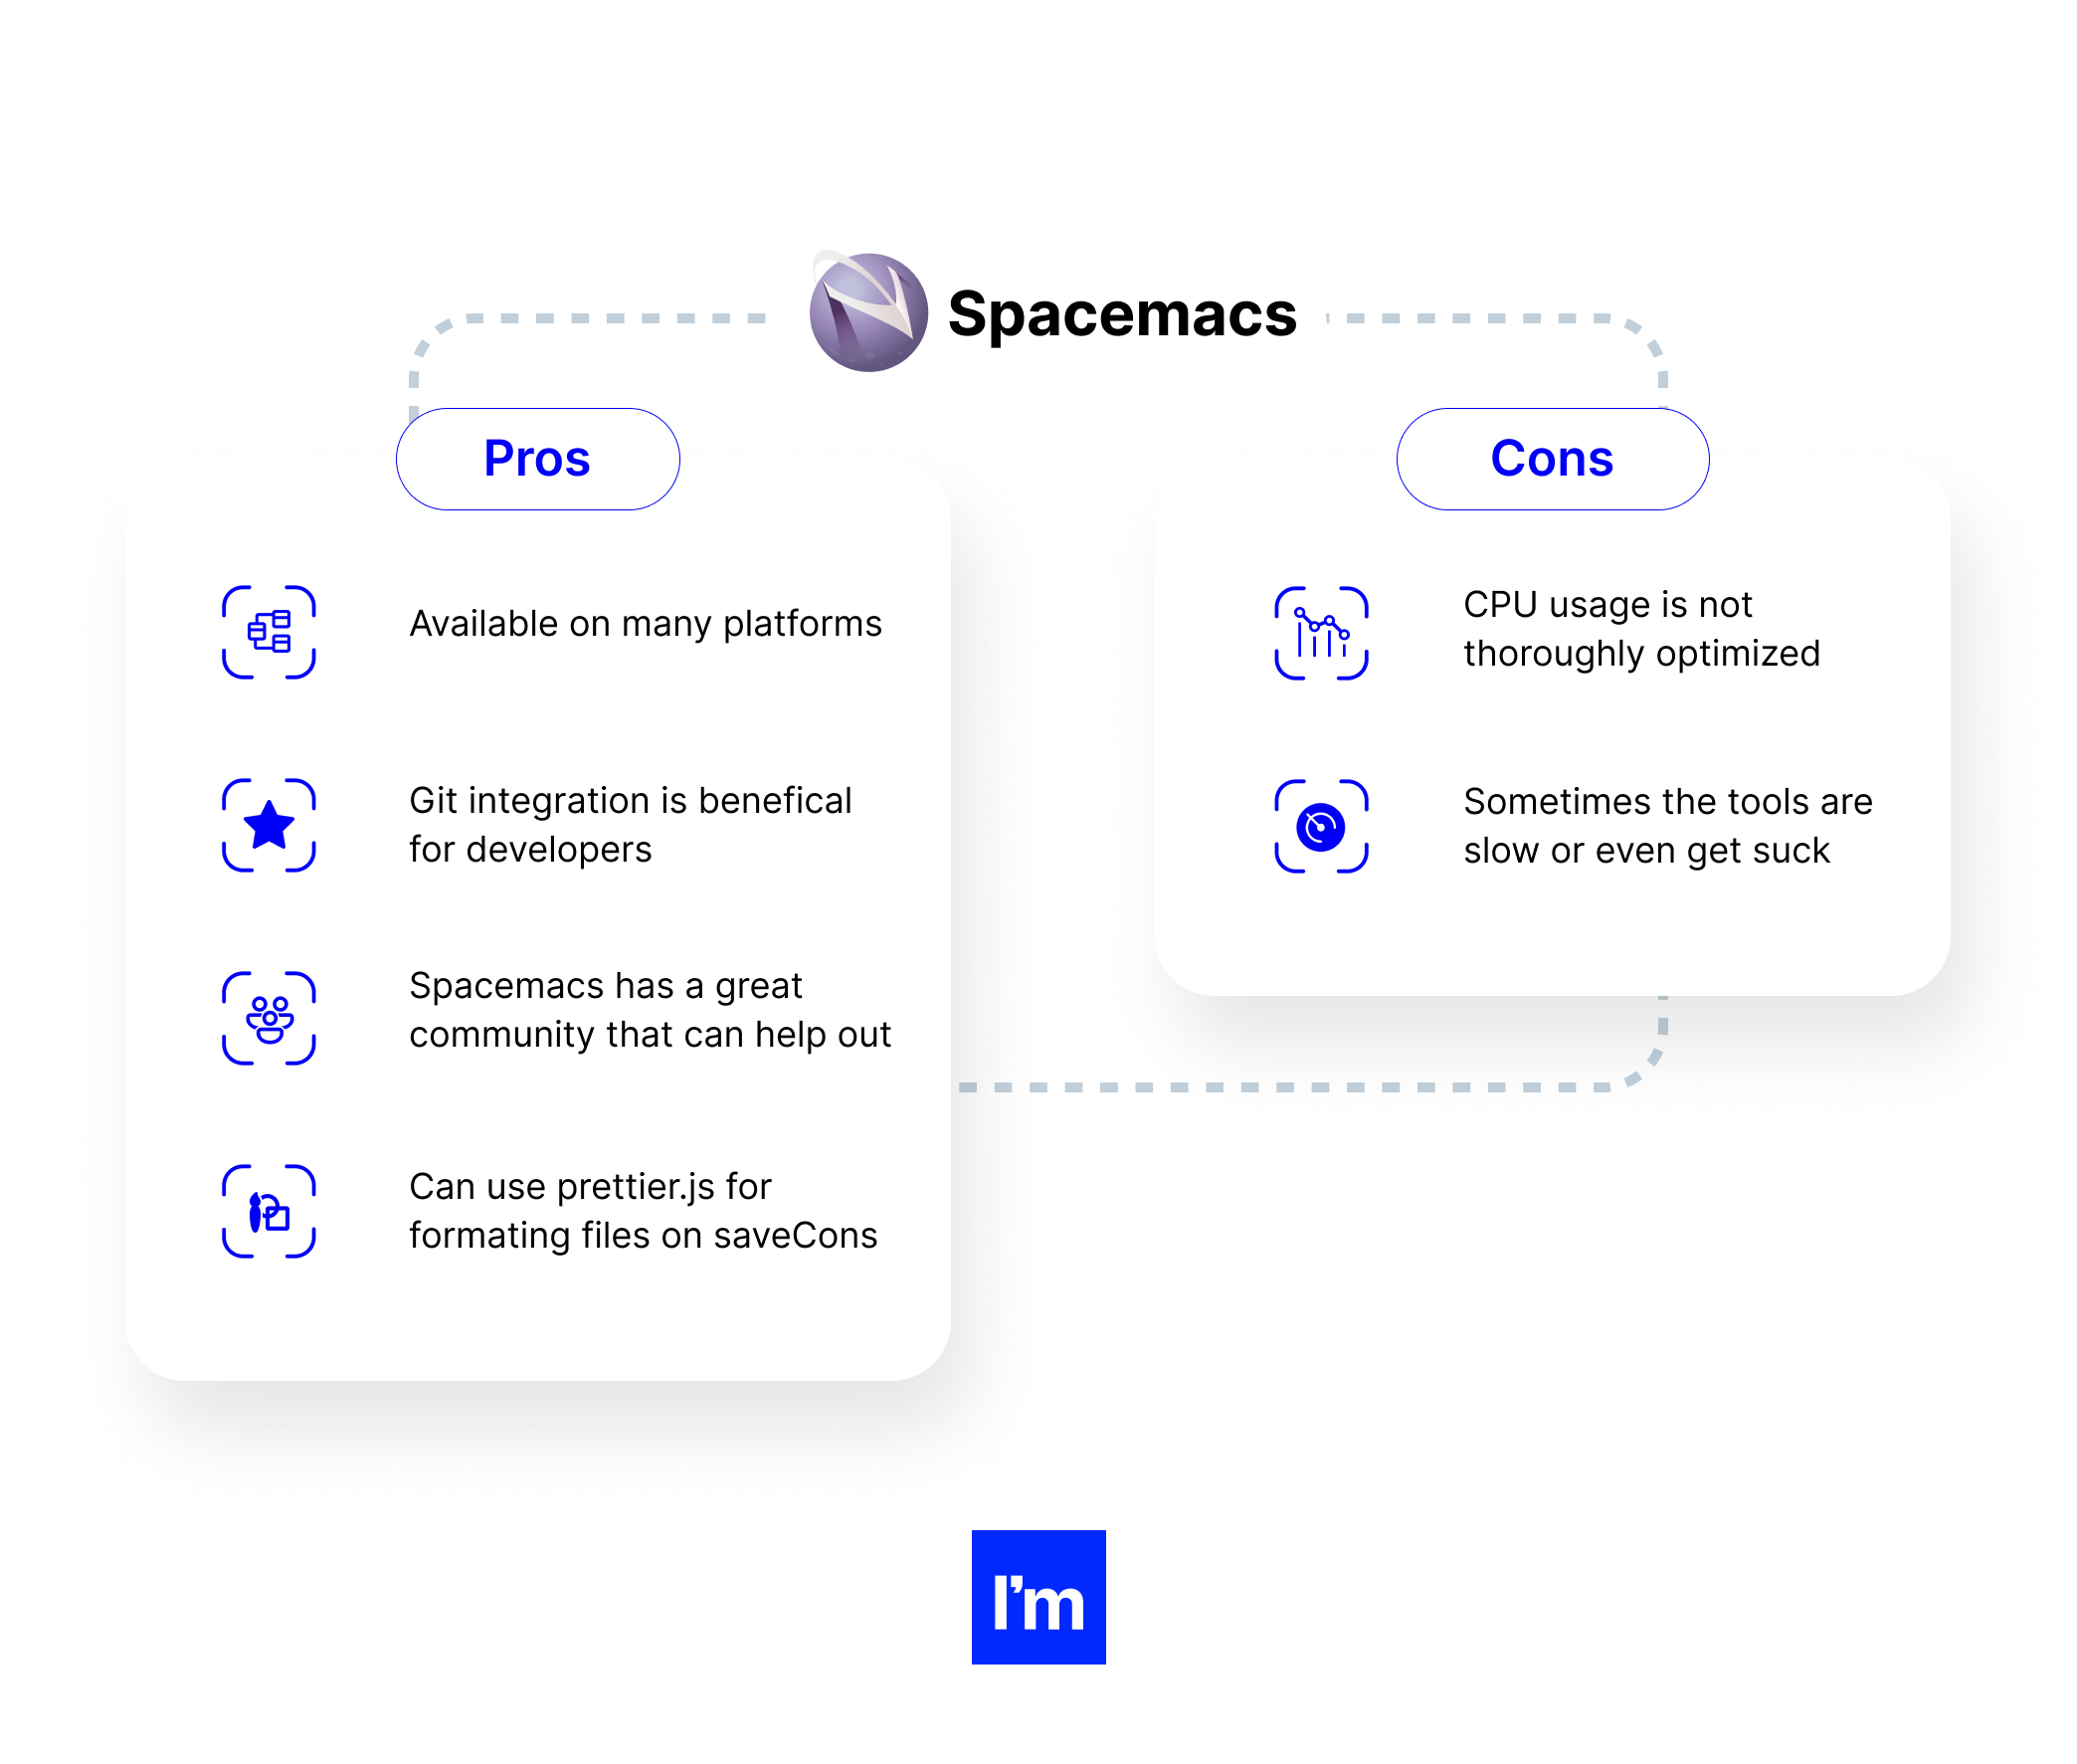 spacemacs pros and cons